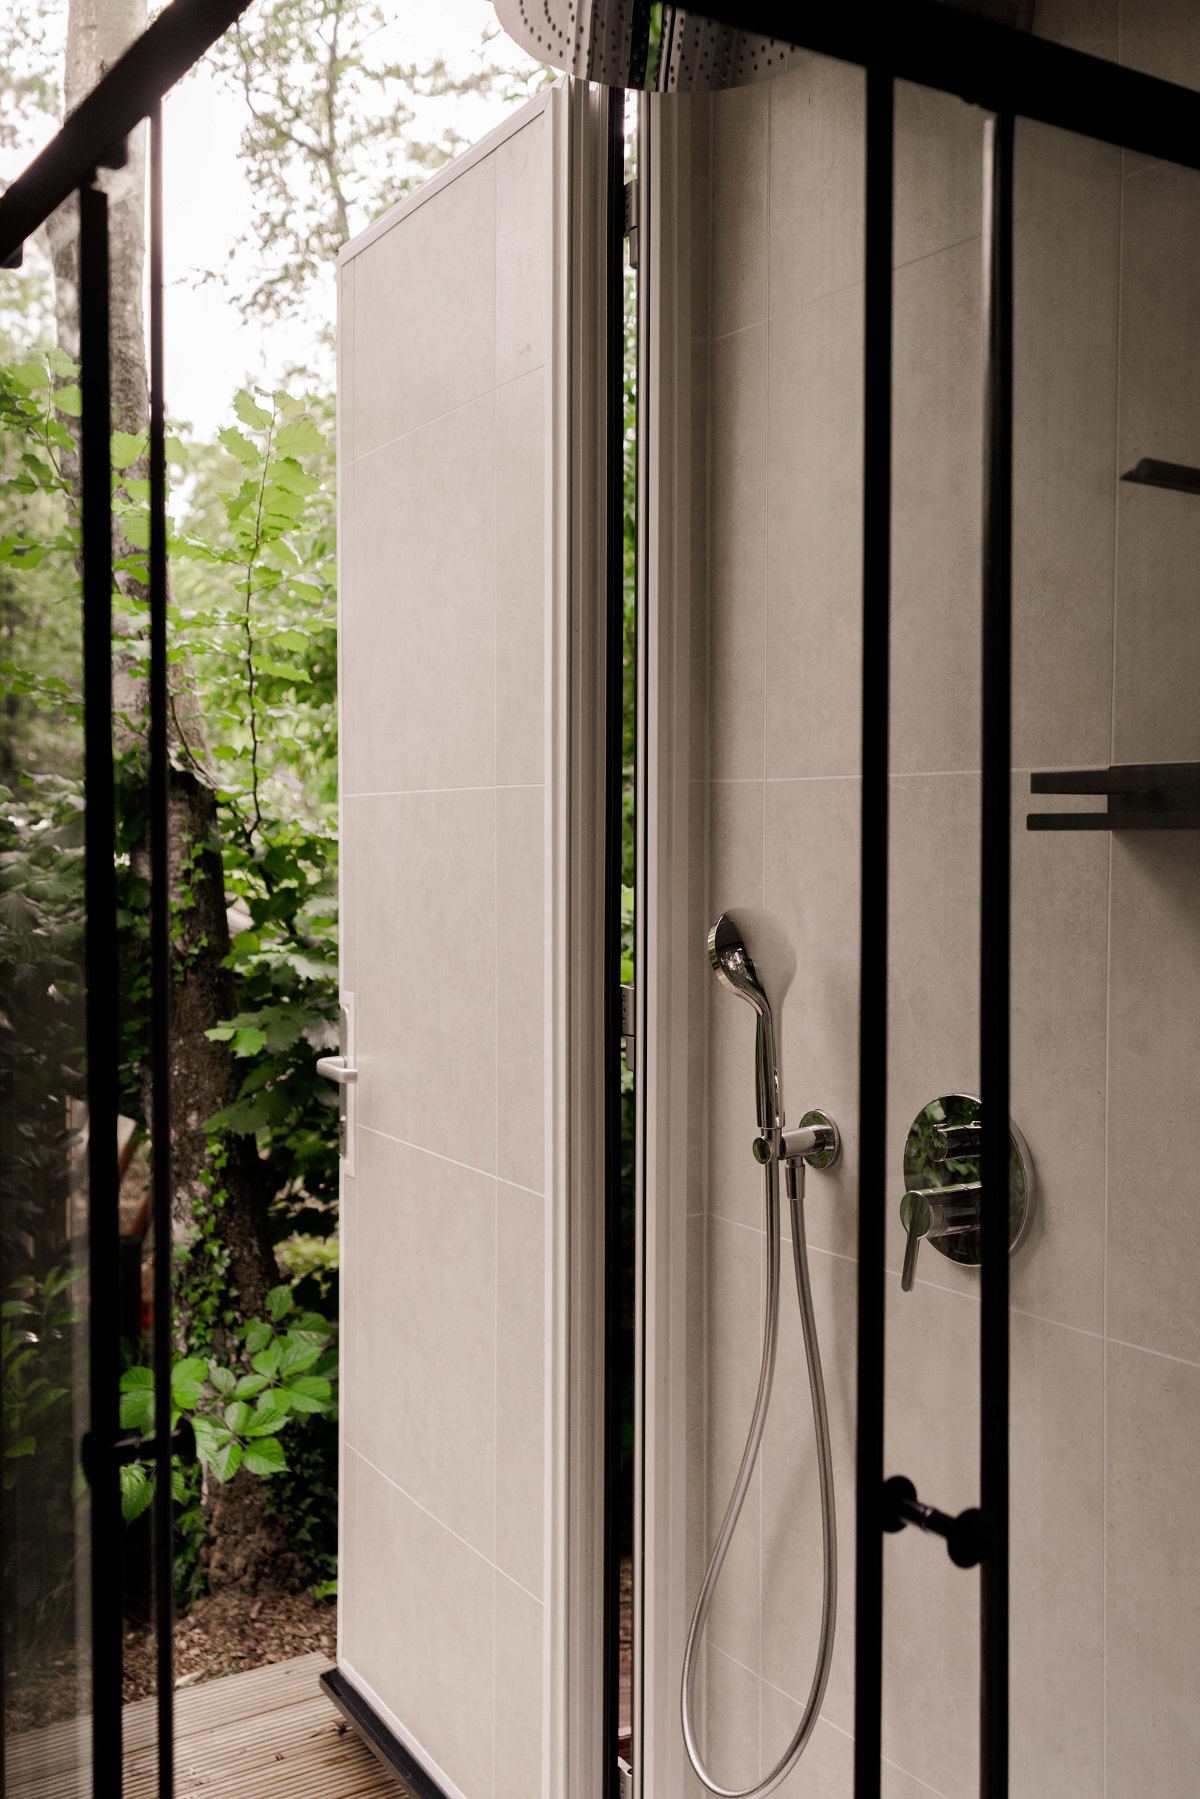 the indoor shower connects to outdoor shower with Duravit fittings in matt black inMori tinyhouse